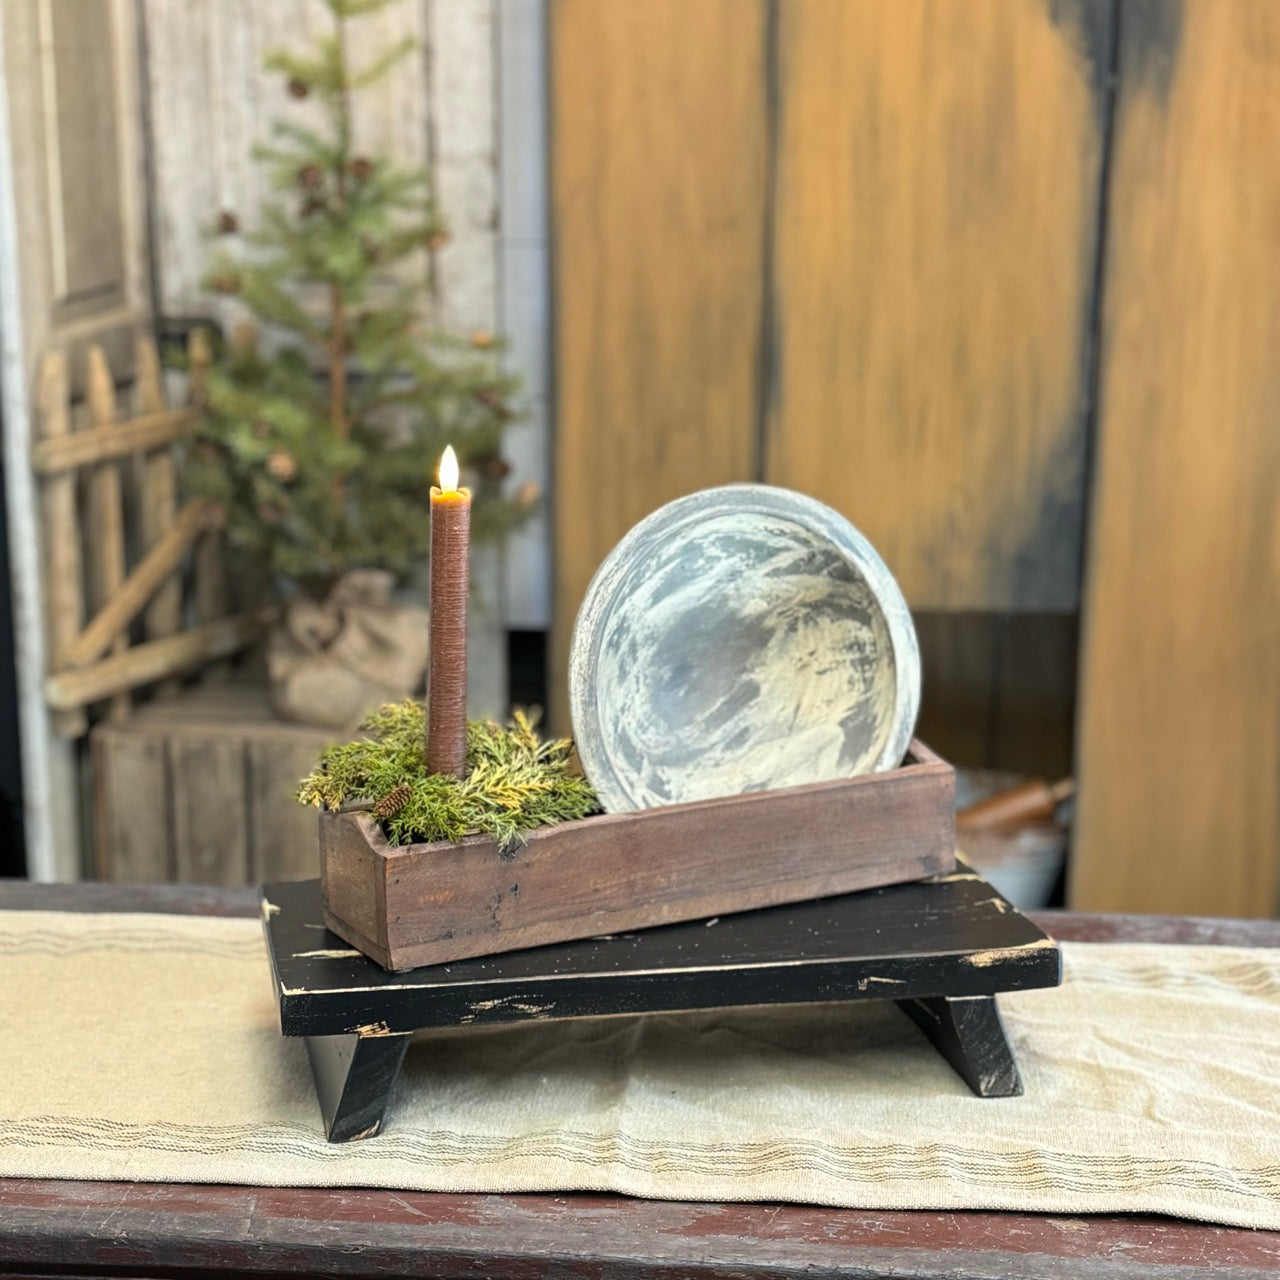 Black Wooden Table Riser - FREE Candle Ring Included - Limited Time!